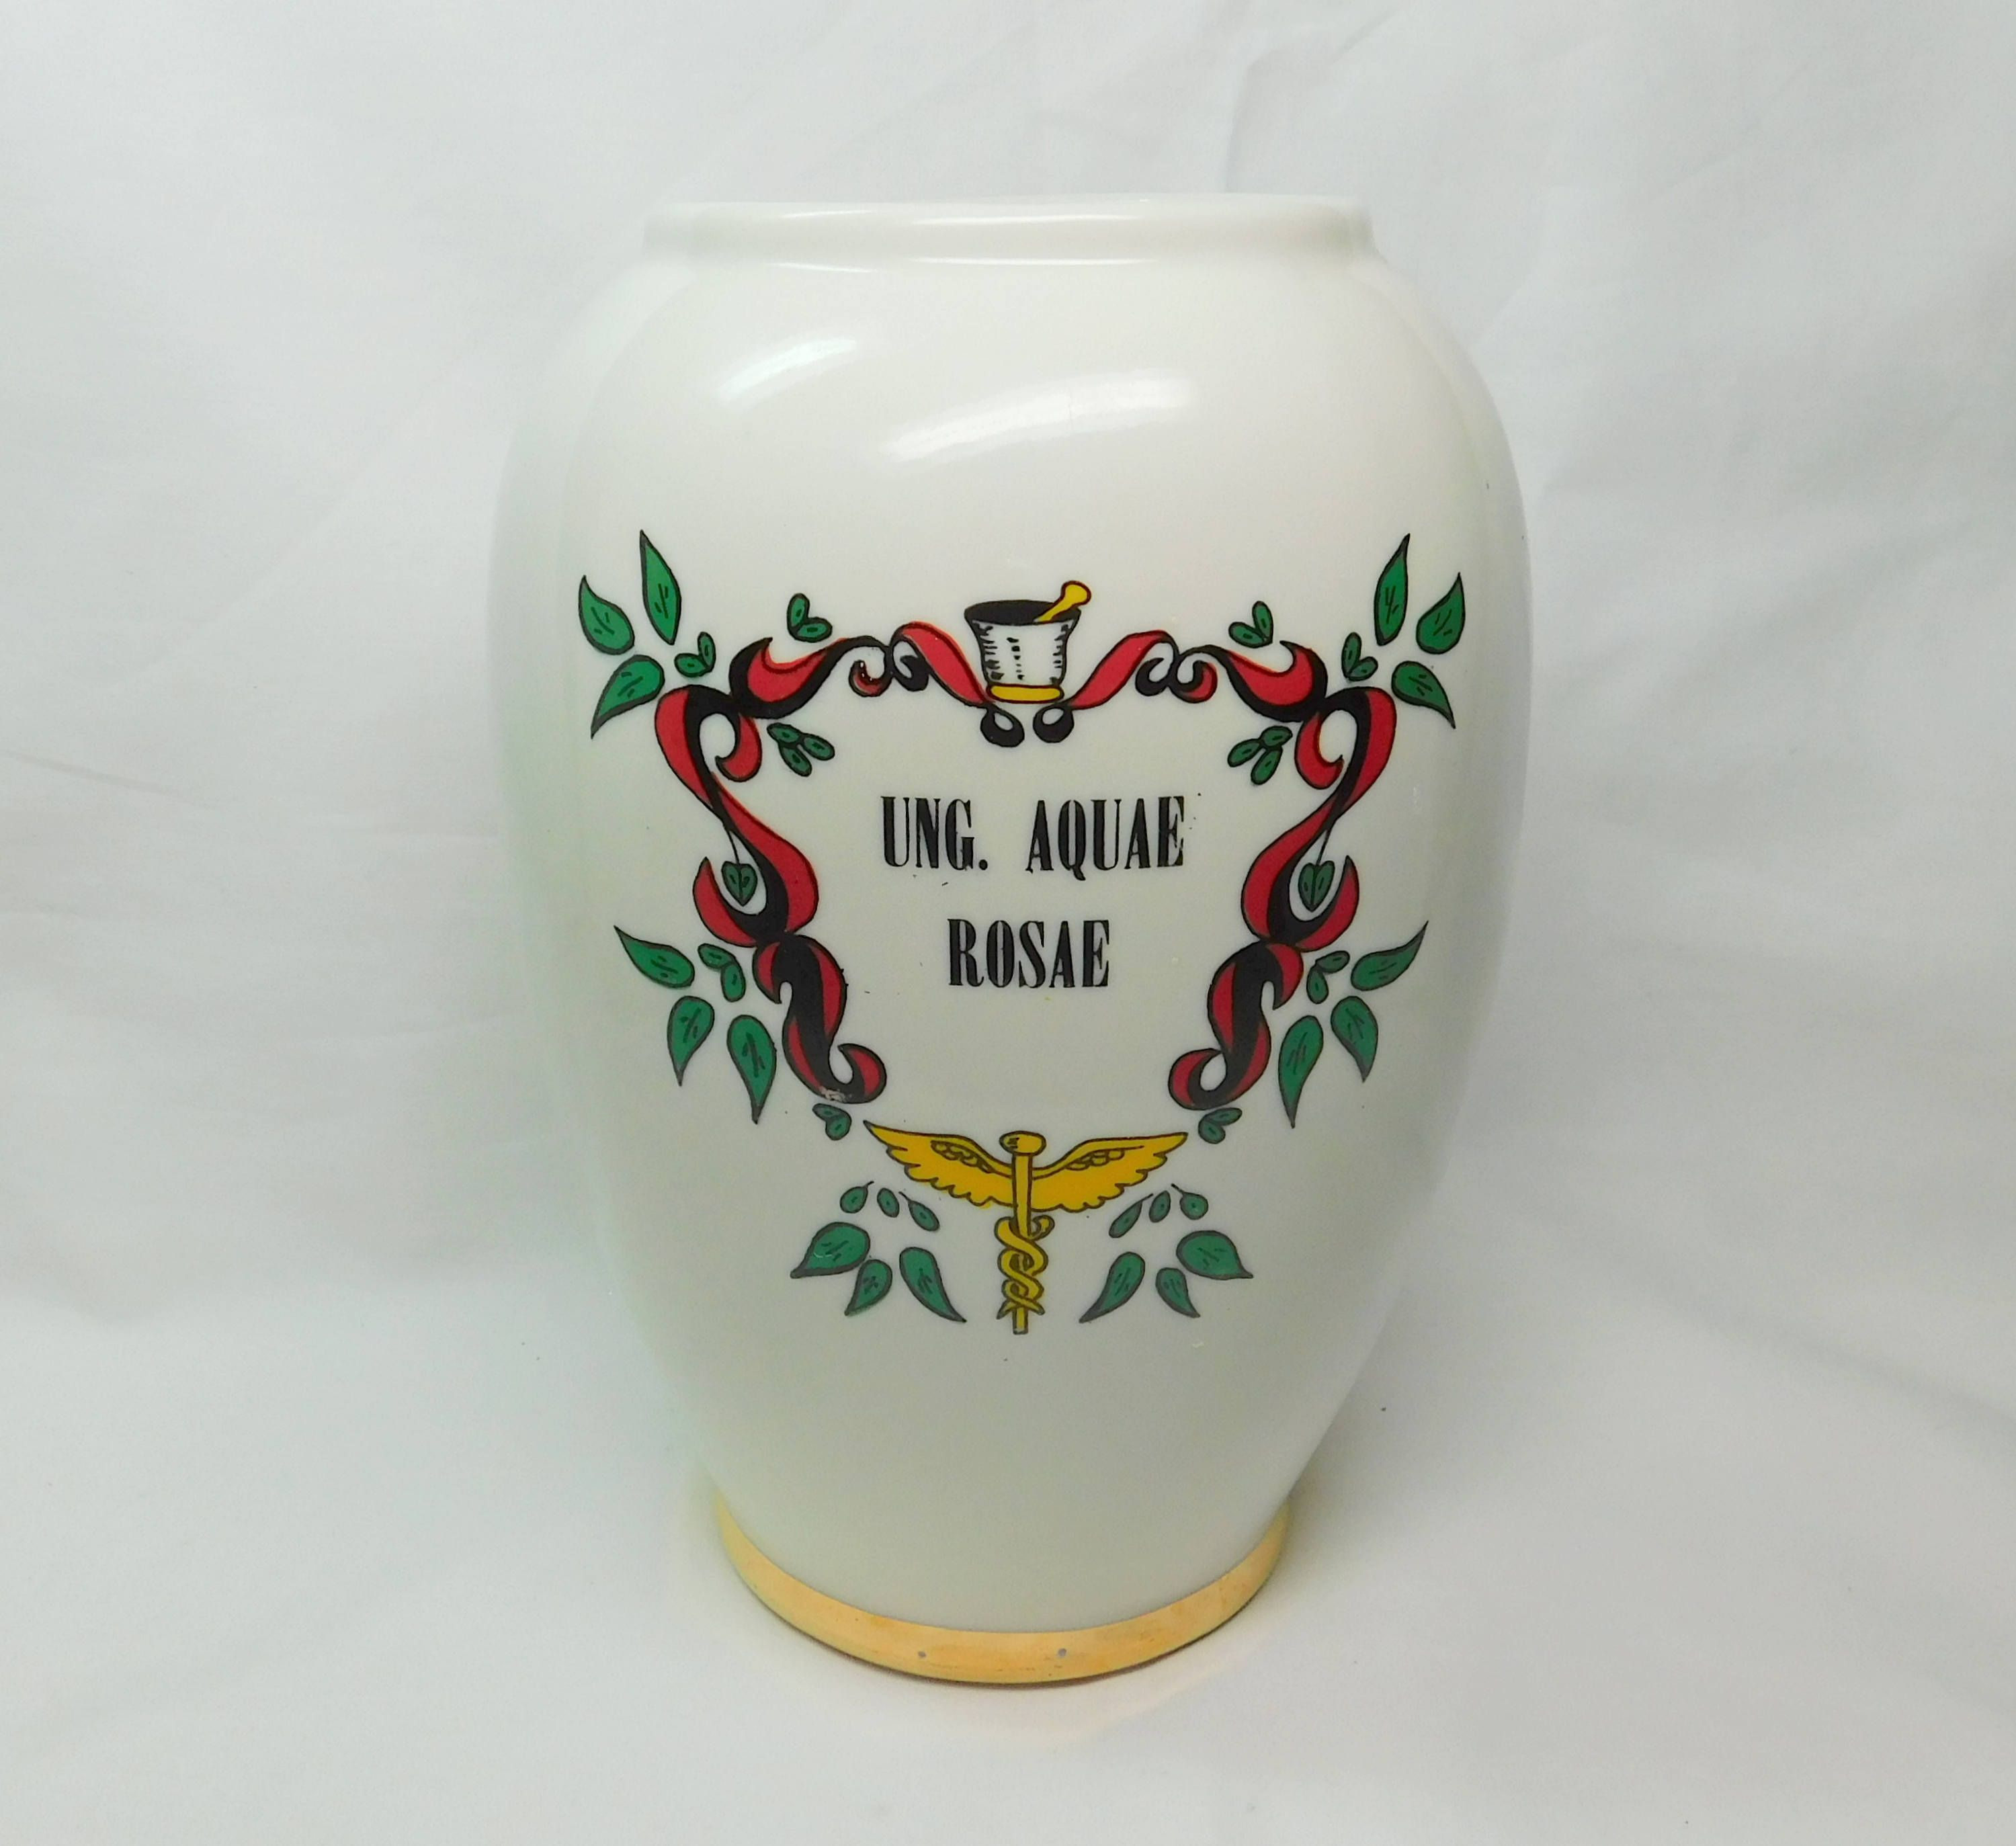 24 attractive Lenox Vases Ebay 2024 free download lenox vases ebay of 43 lenox vase with gold trim the weekly world inside vintage fashioned by blair apothecary porcelain vase latin ung